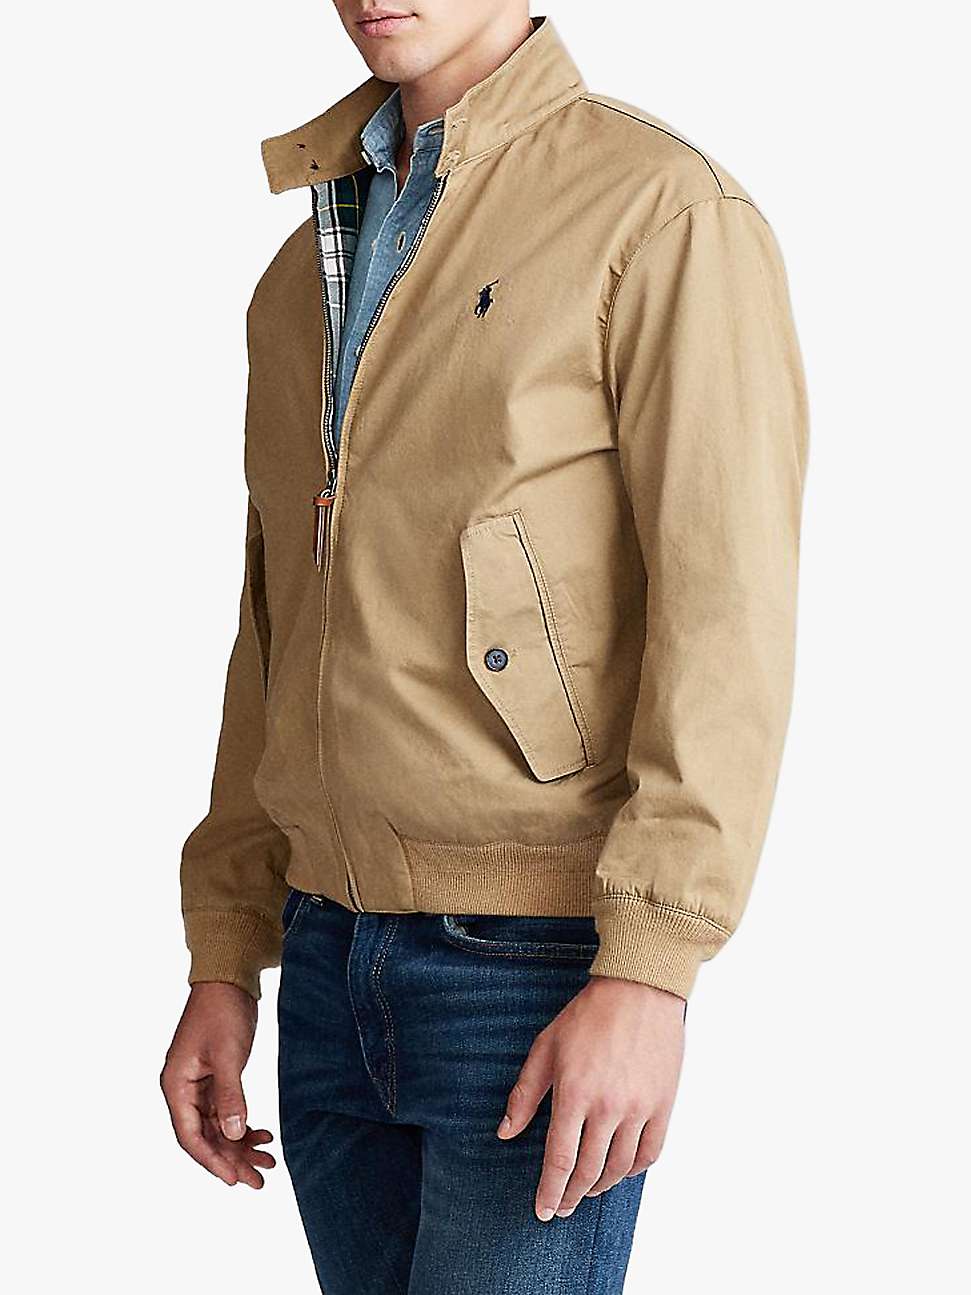 Polo Ralph Lauren Barracuda Cotton Twill Lined Jacket, Luxury Tan at John Lewis & Partners